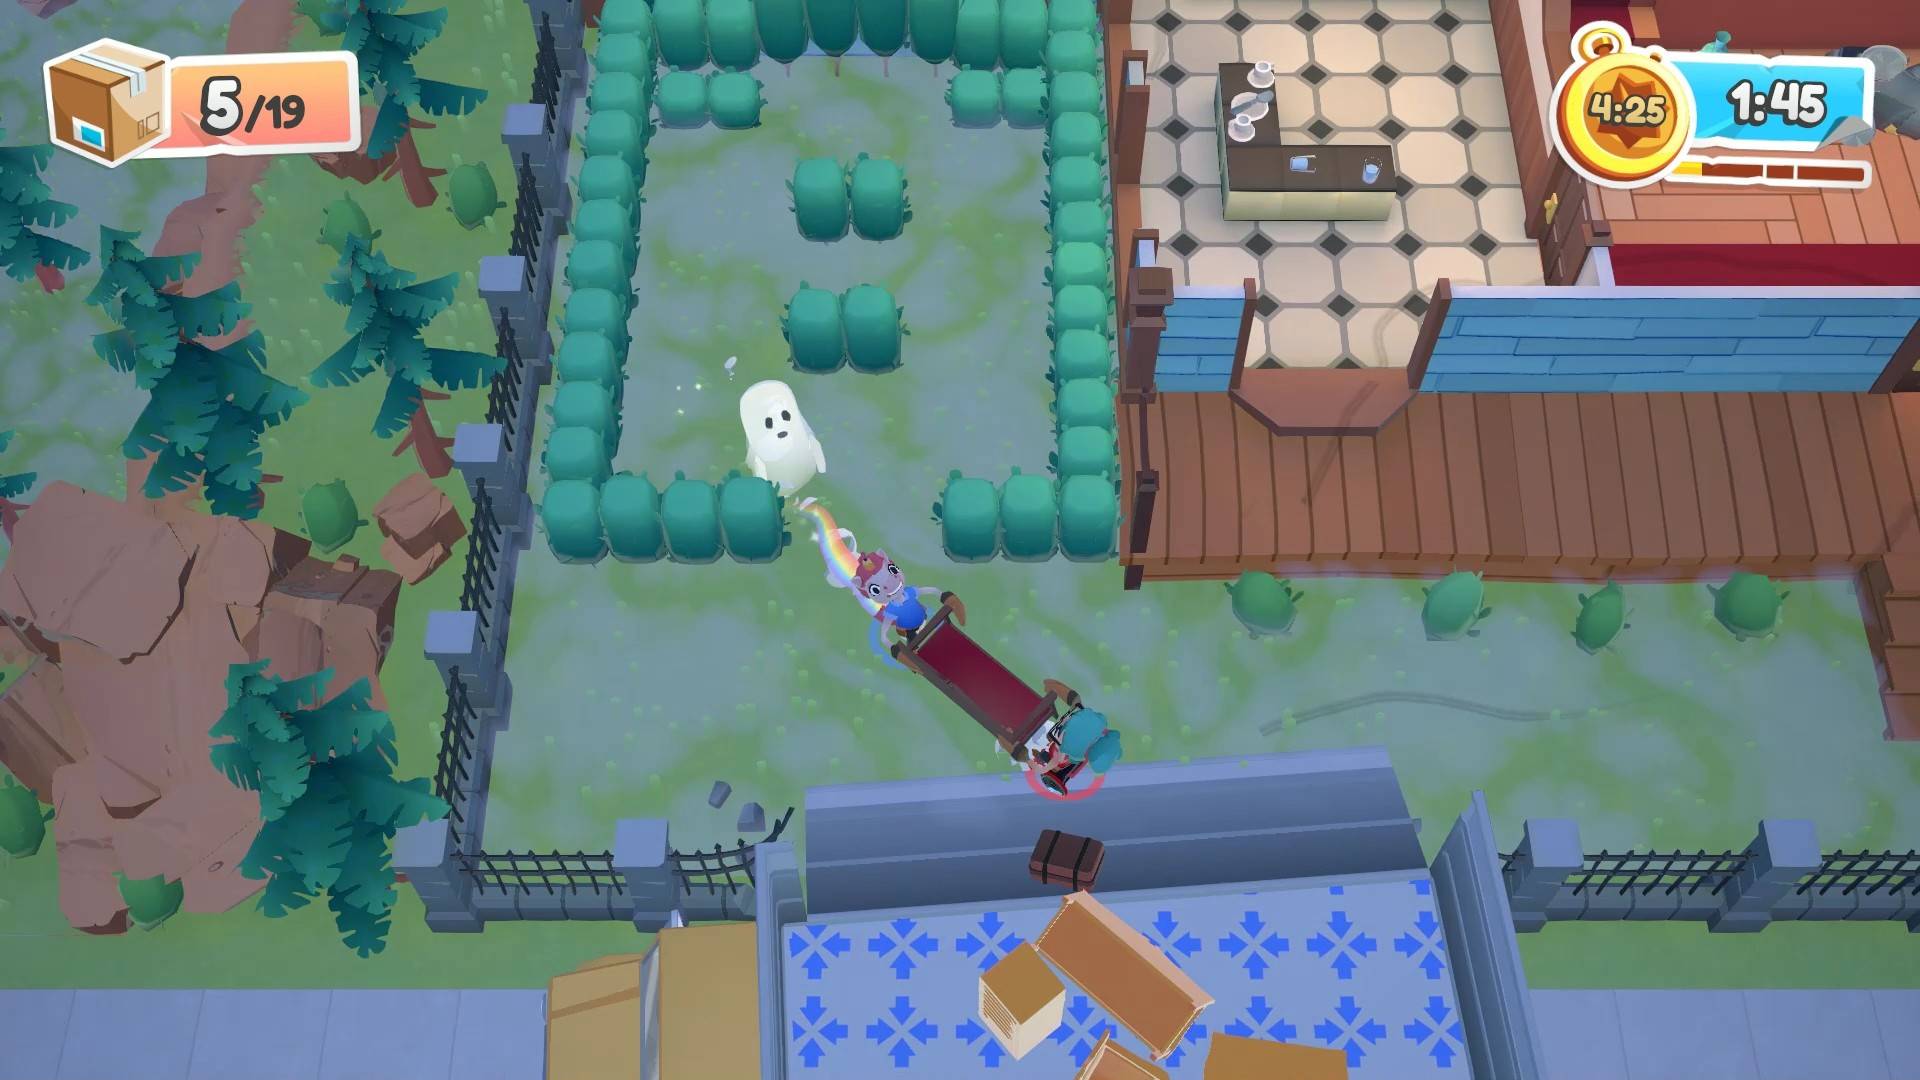 Best Switch multiplayer games: Two characters attempt to move furniture in a garden filled with hazards